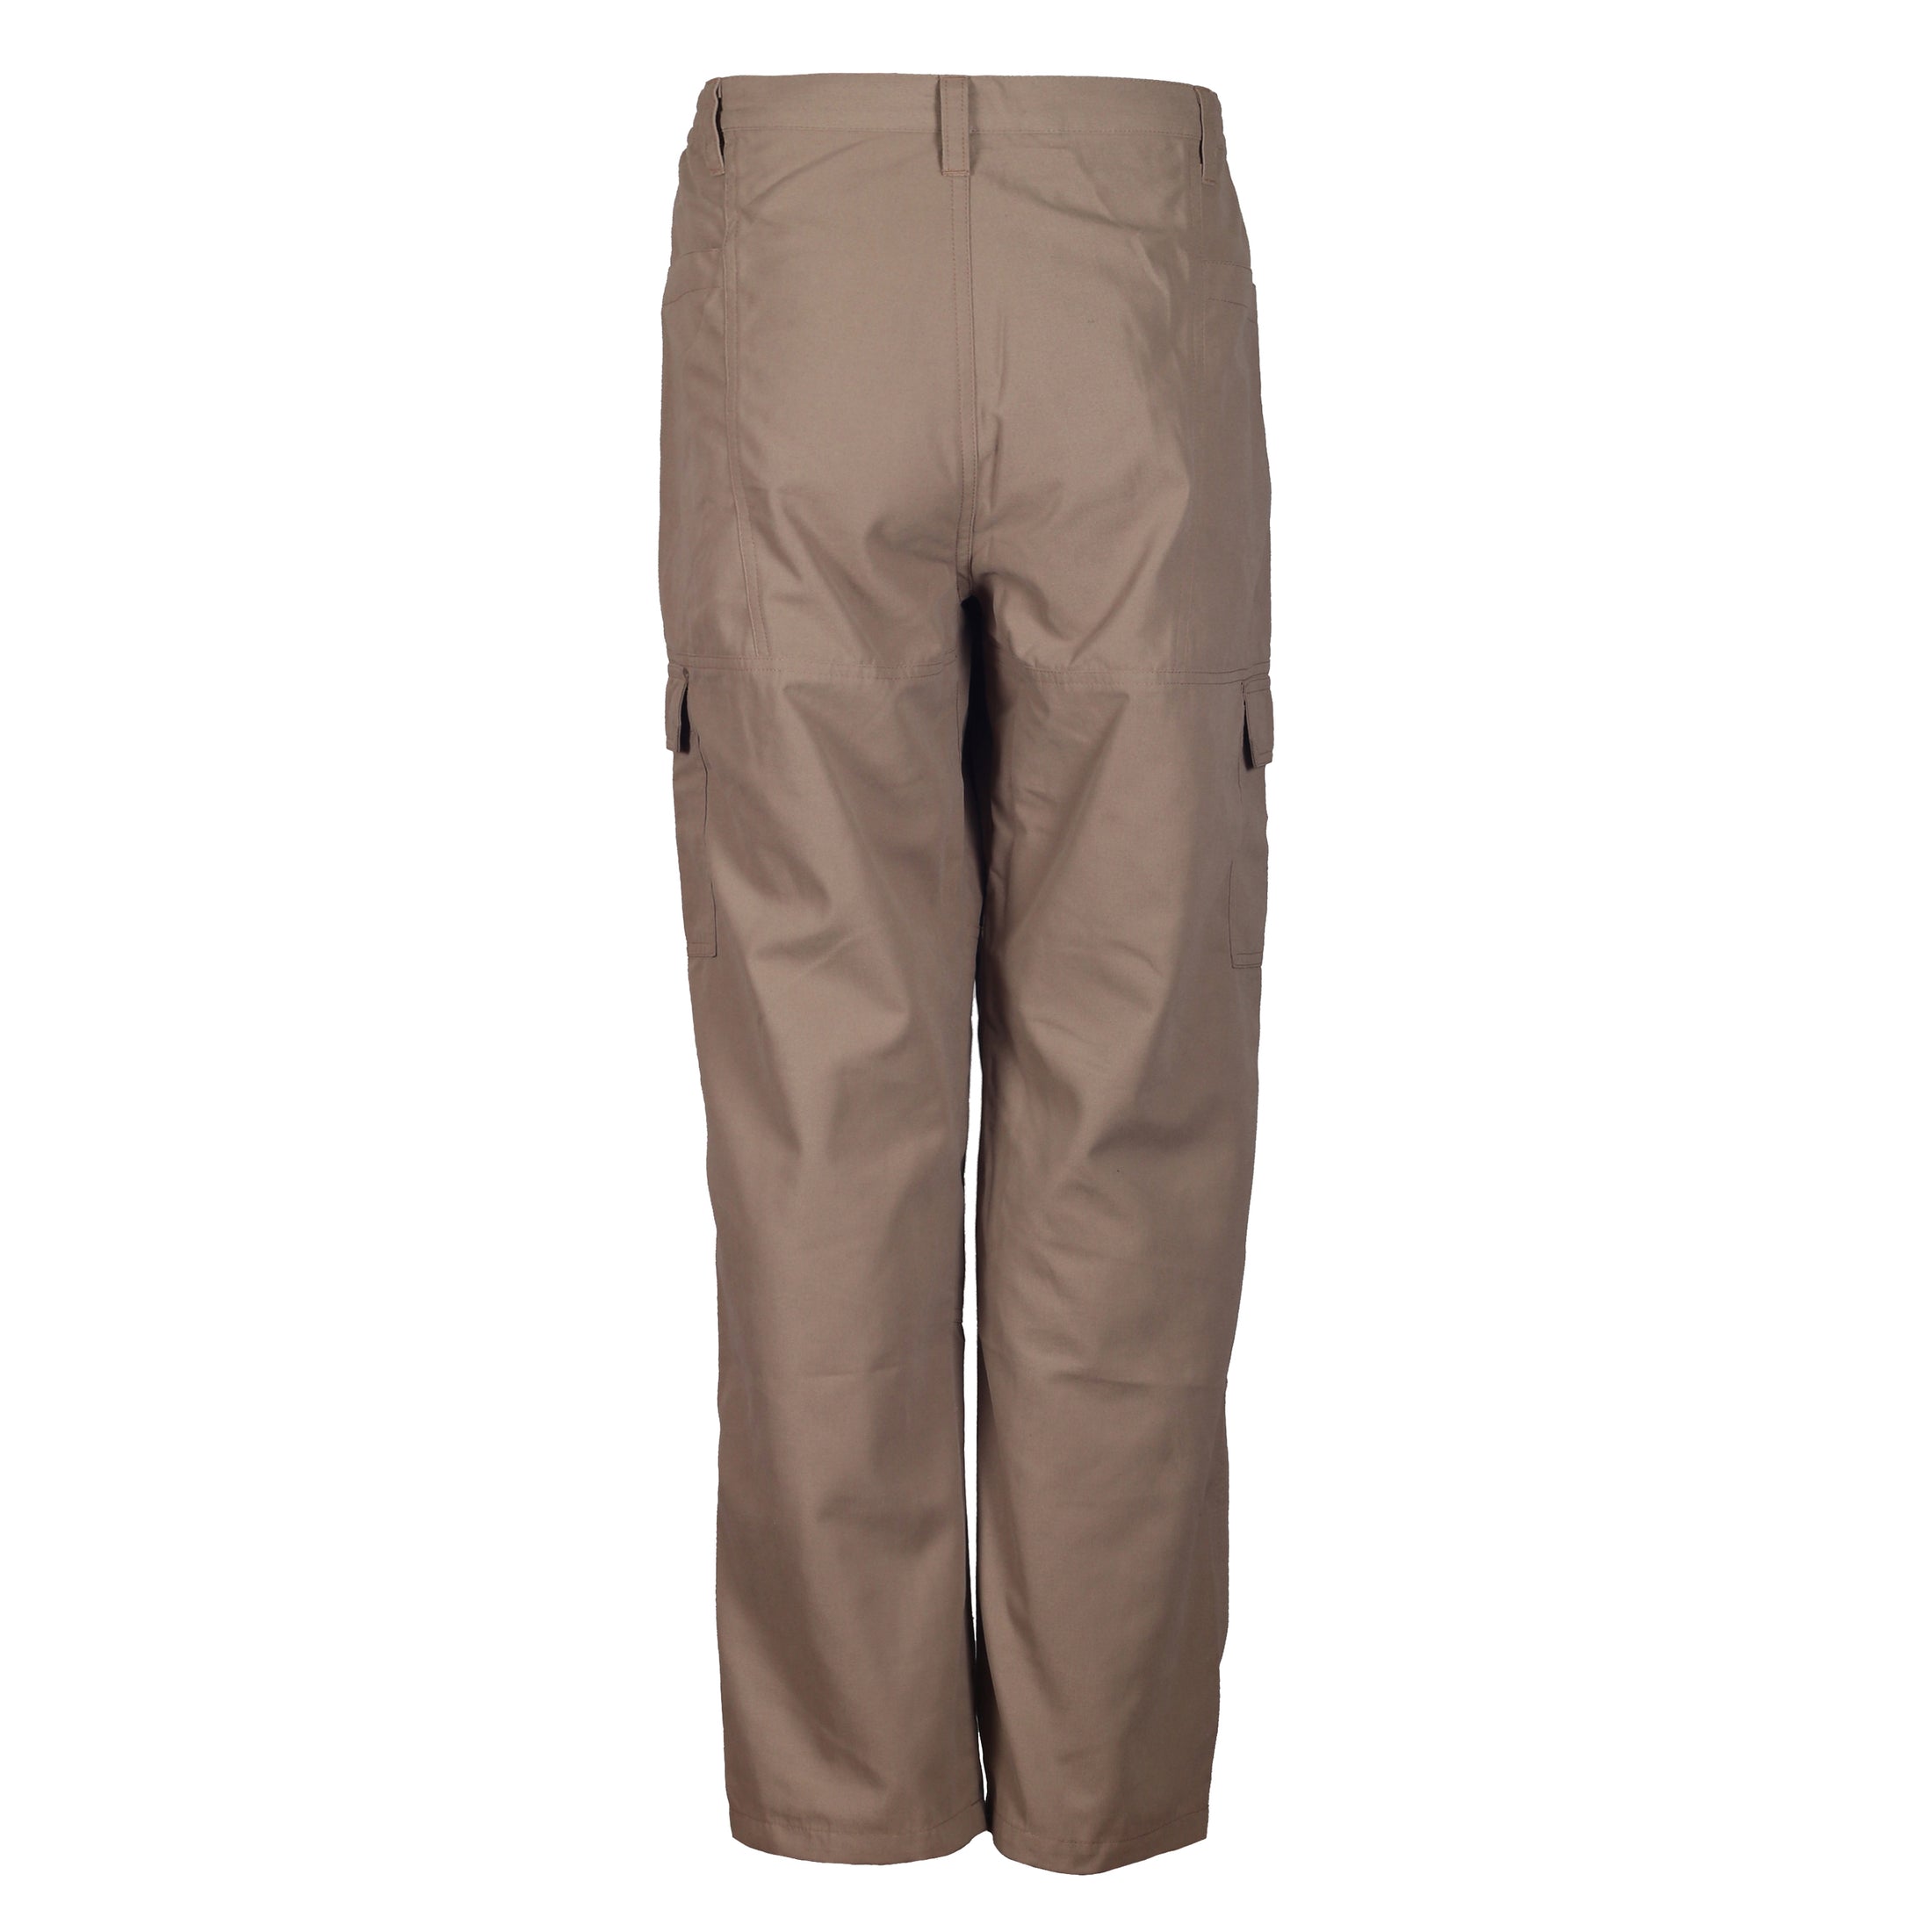 gamehide ElimiTick Tactical Style Eight Pocket Field Pant side (tan)